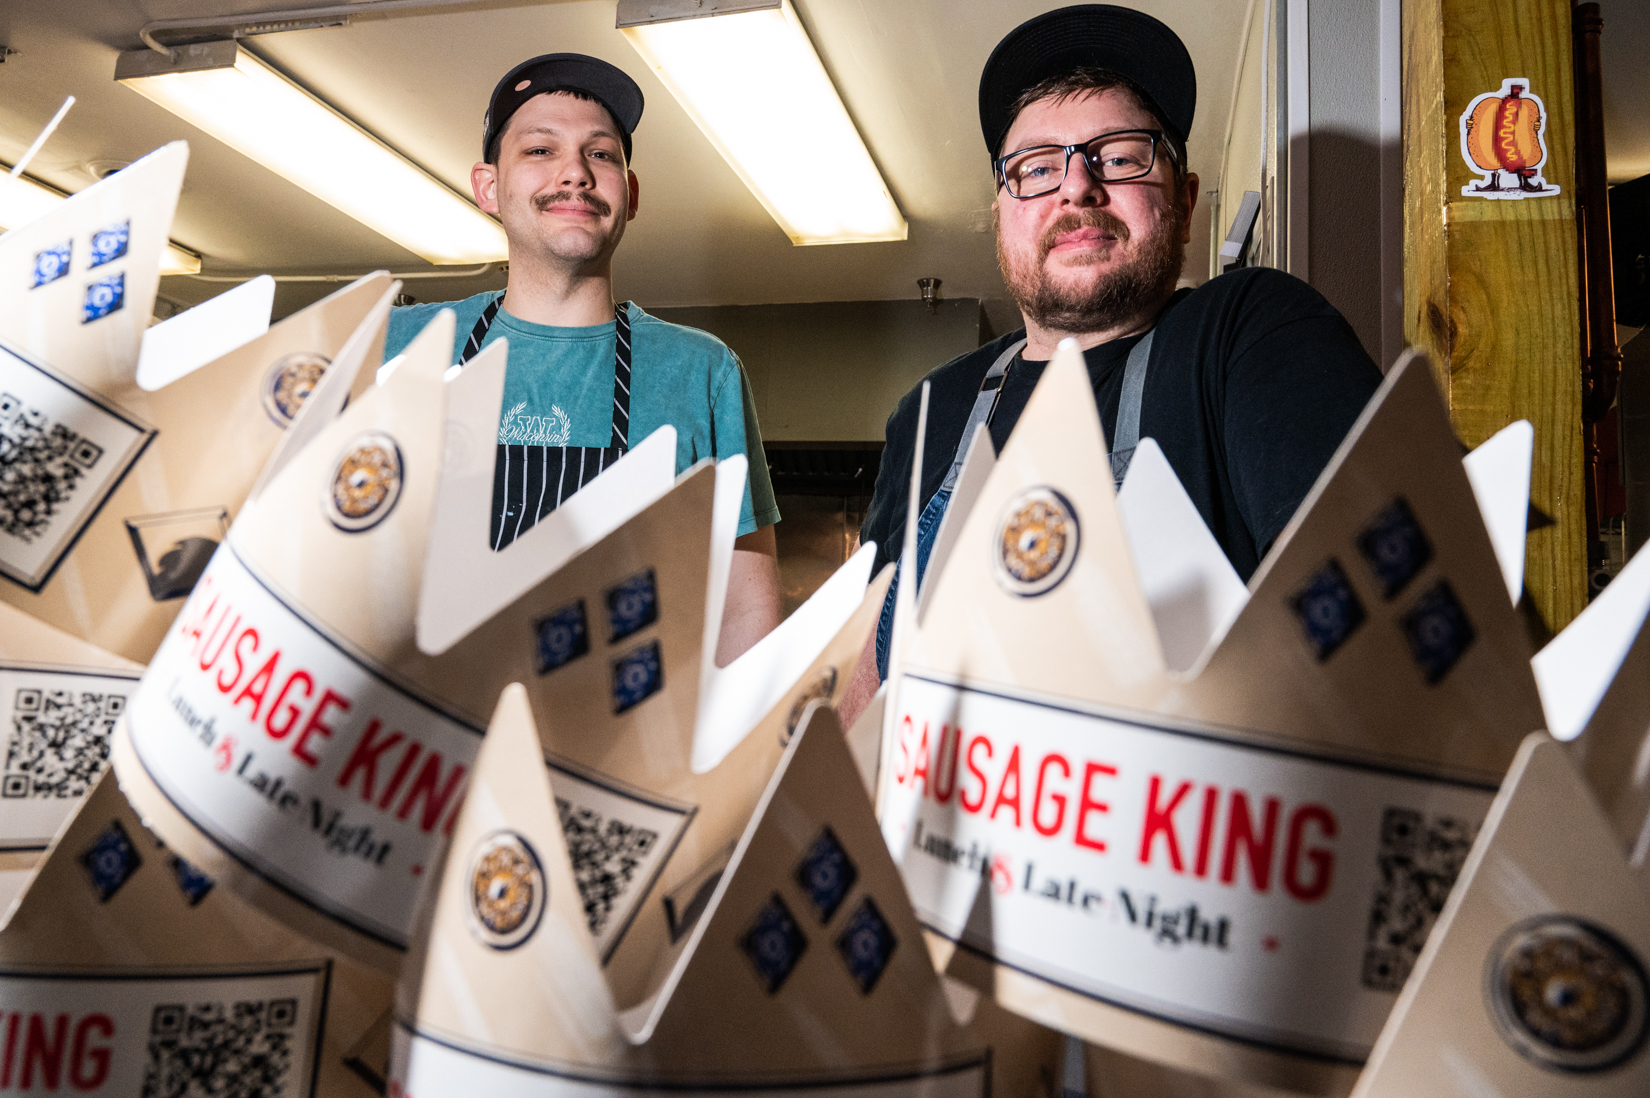 Drunk Eats Spot Sausage King Opens In Logan Square With Lots Of Dirty Jokes For Late-Night Crowd pic